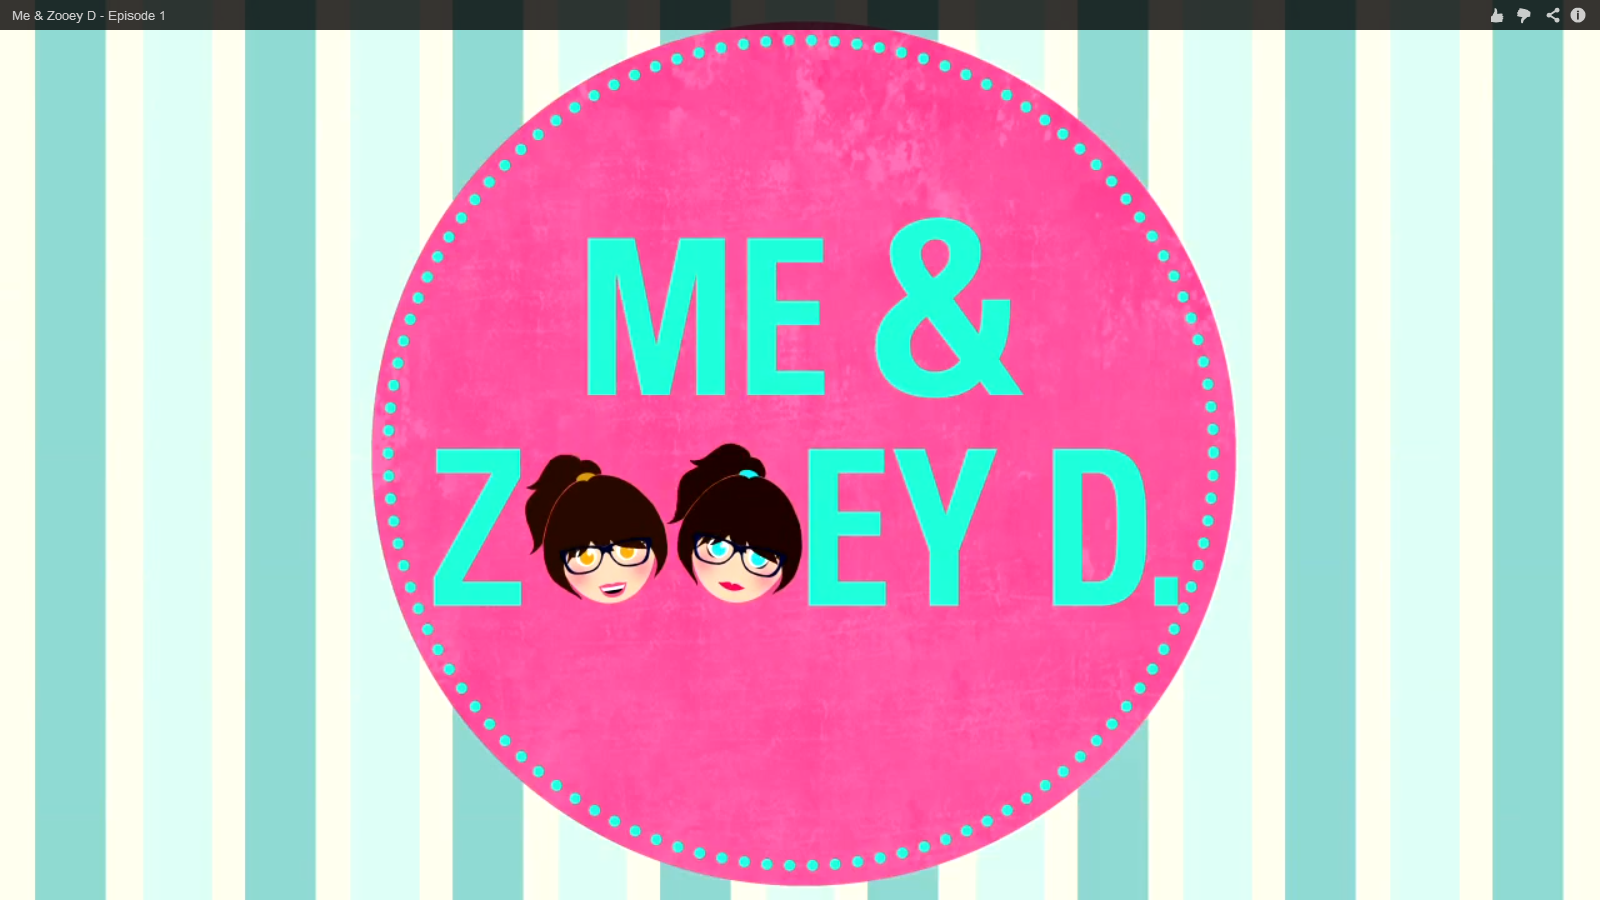 ‘Me and Zooey D.’ Puts a Quirky Spin on Celebrity Obsession